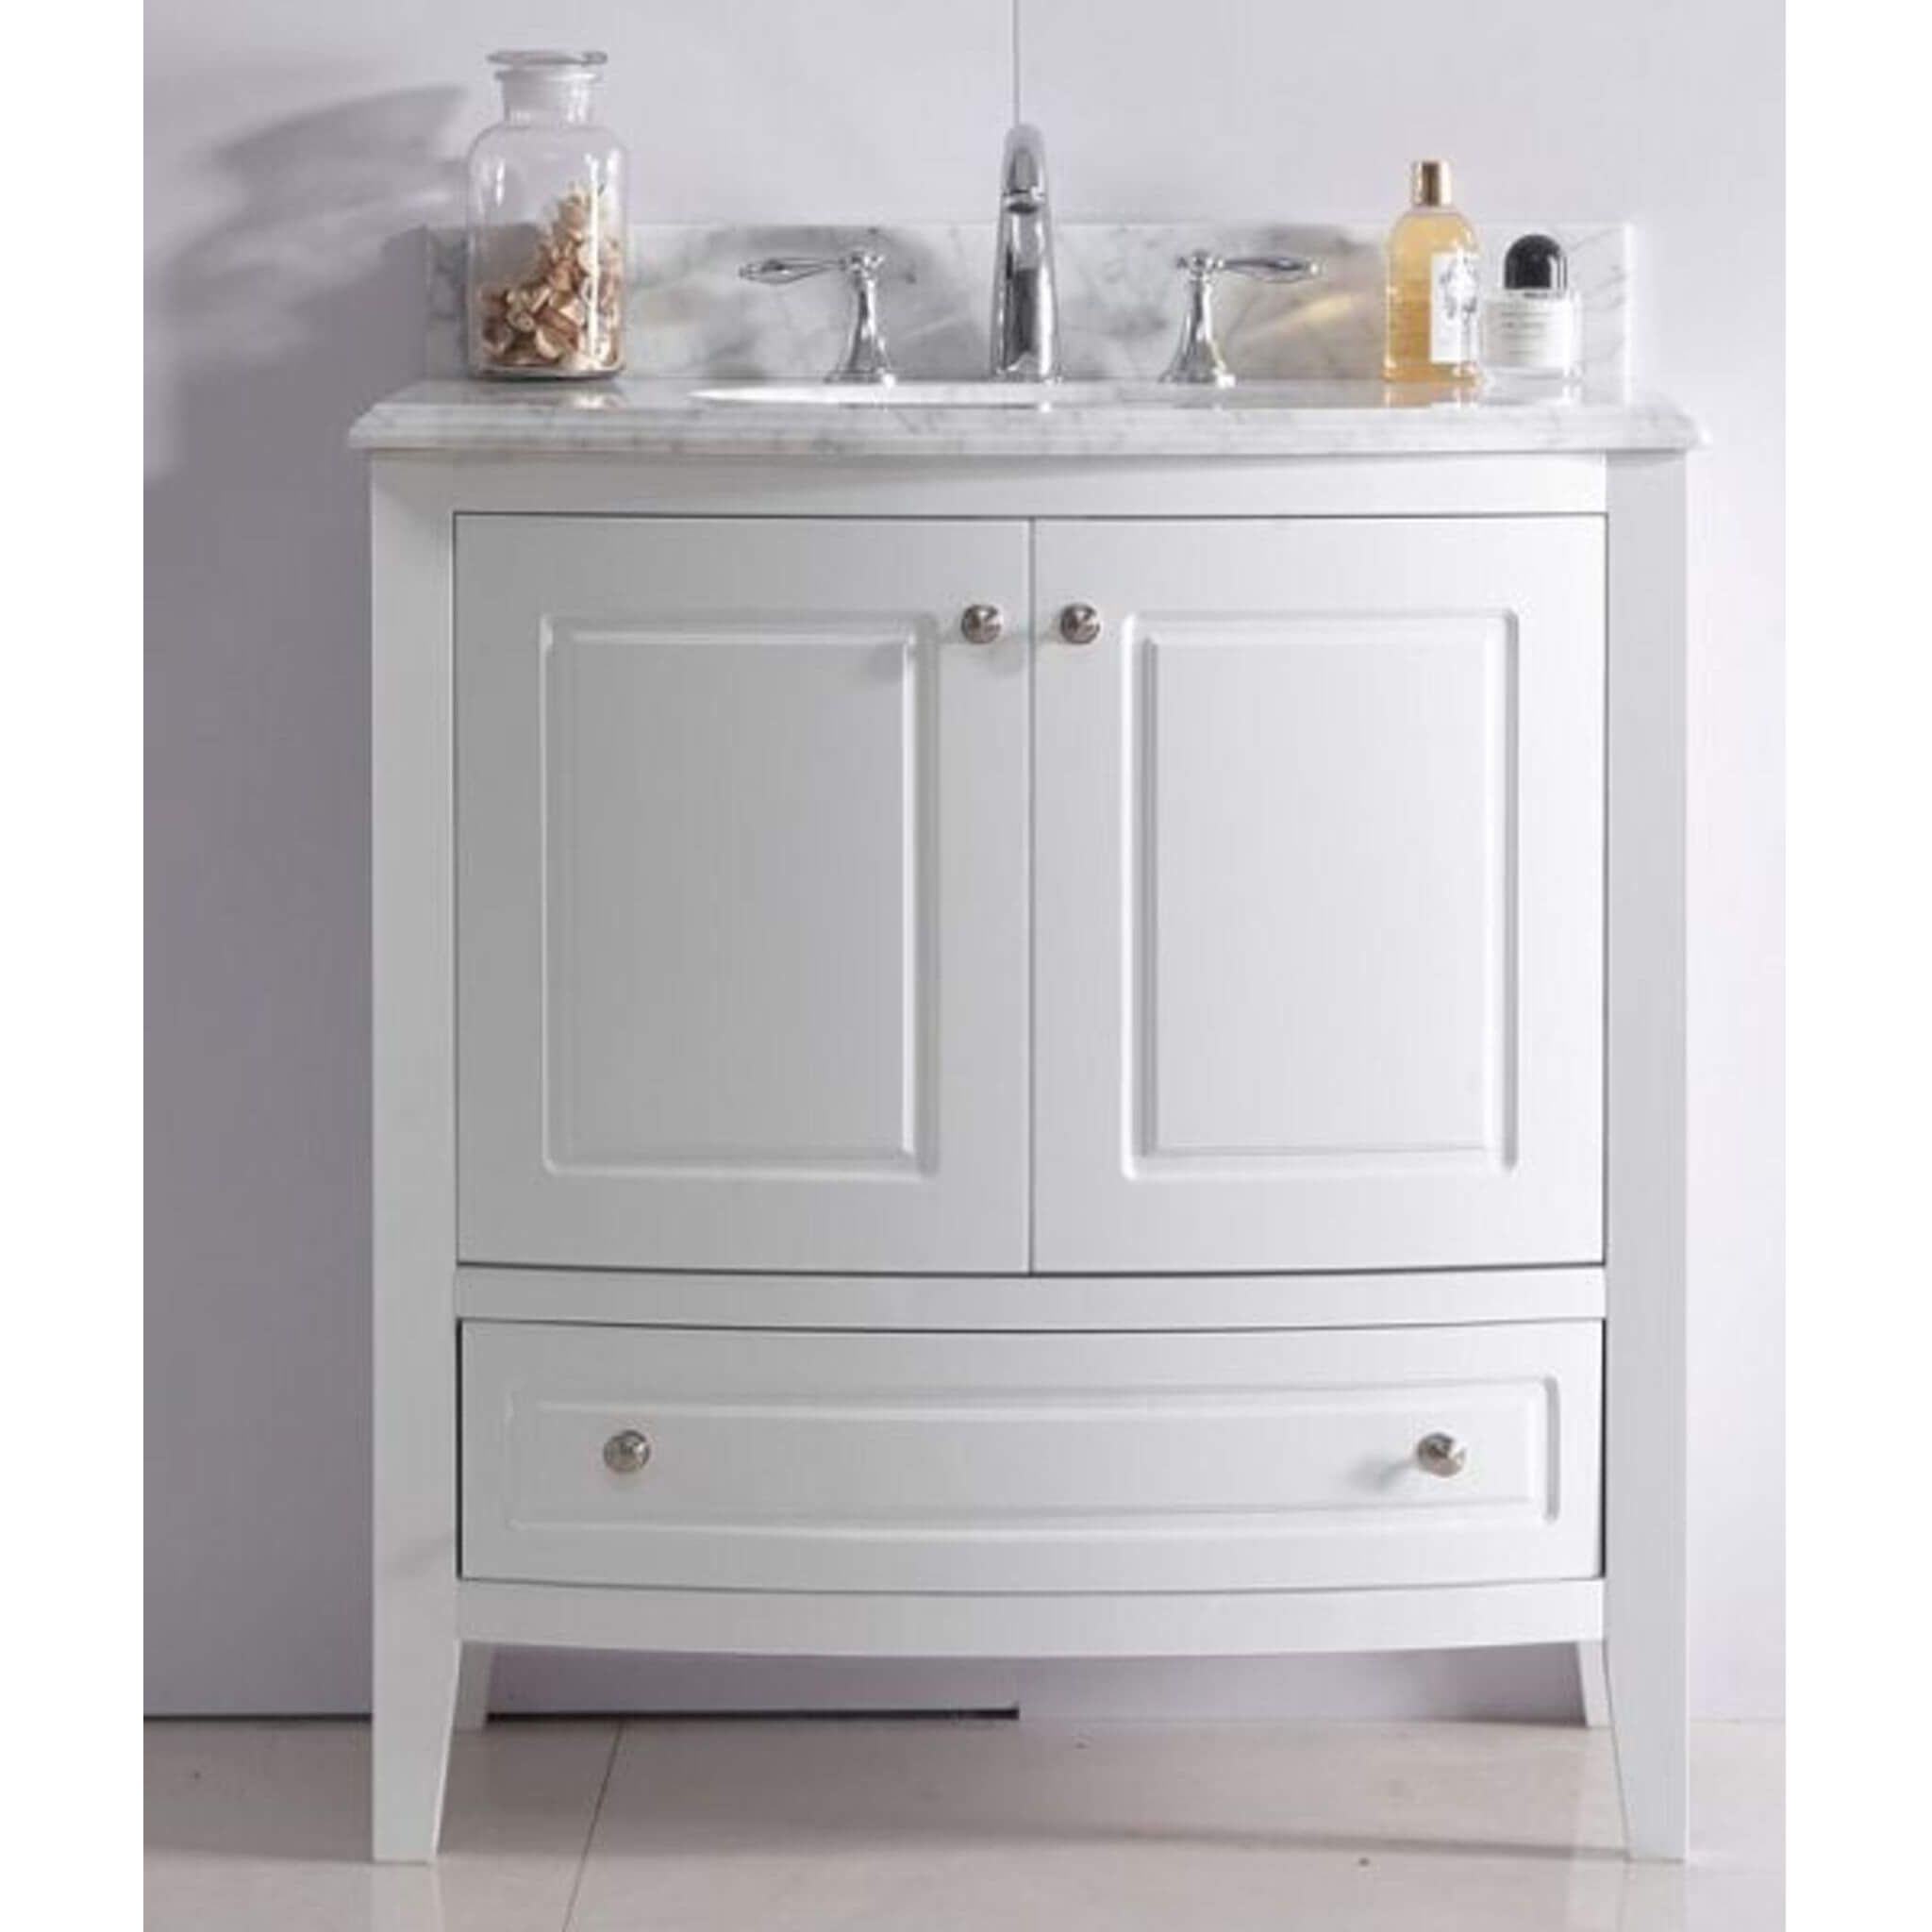 LAVIVA Estella 3130709-32W-WC 32" Single Bathroom Vanity in White with White Carrara Marble, White Oval Sink, Front View